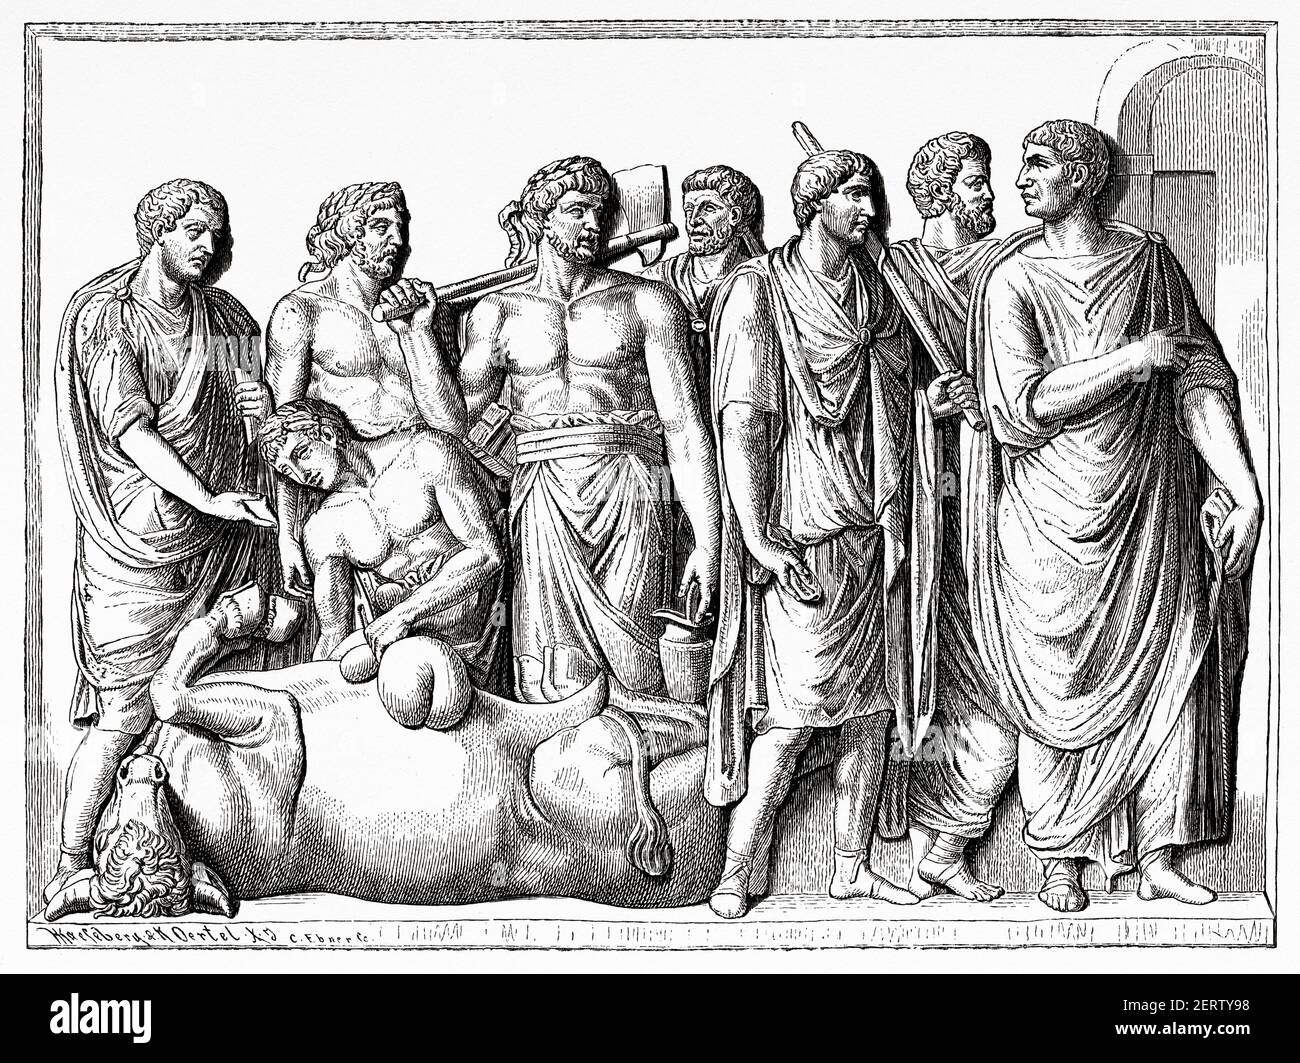 Haruspex. Priest who in ancient Rome religion predicted the future by observing the appearance of the entrails of sacrificed animals, Ancient roman empire. Italy, Europe. Old 19th century engraved illustration, El Mundo Ilustrado 1881 Stock Photo